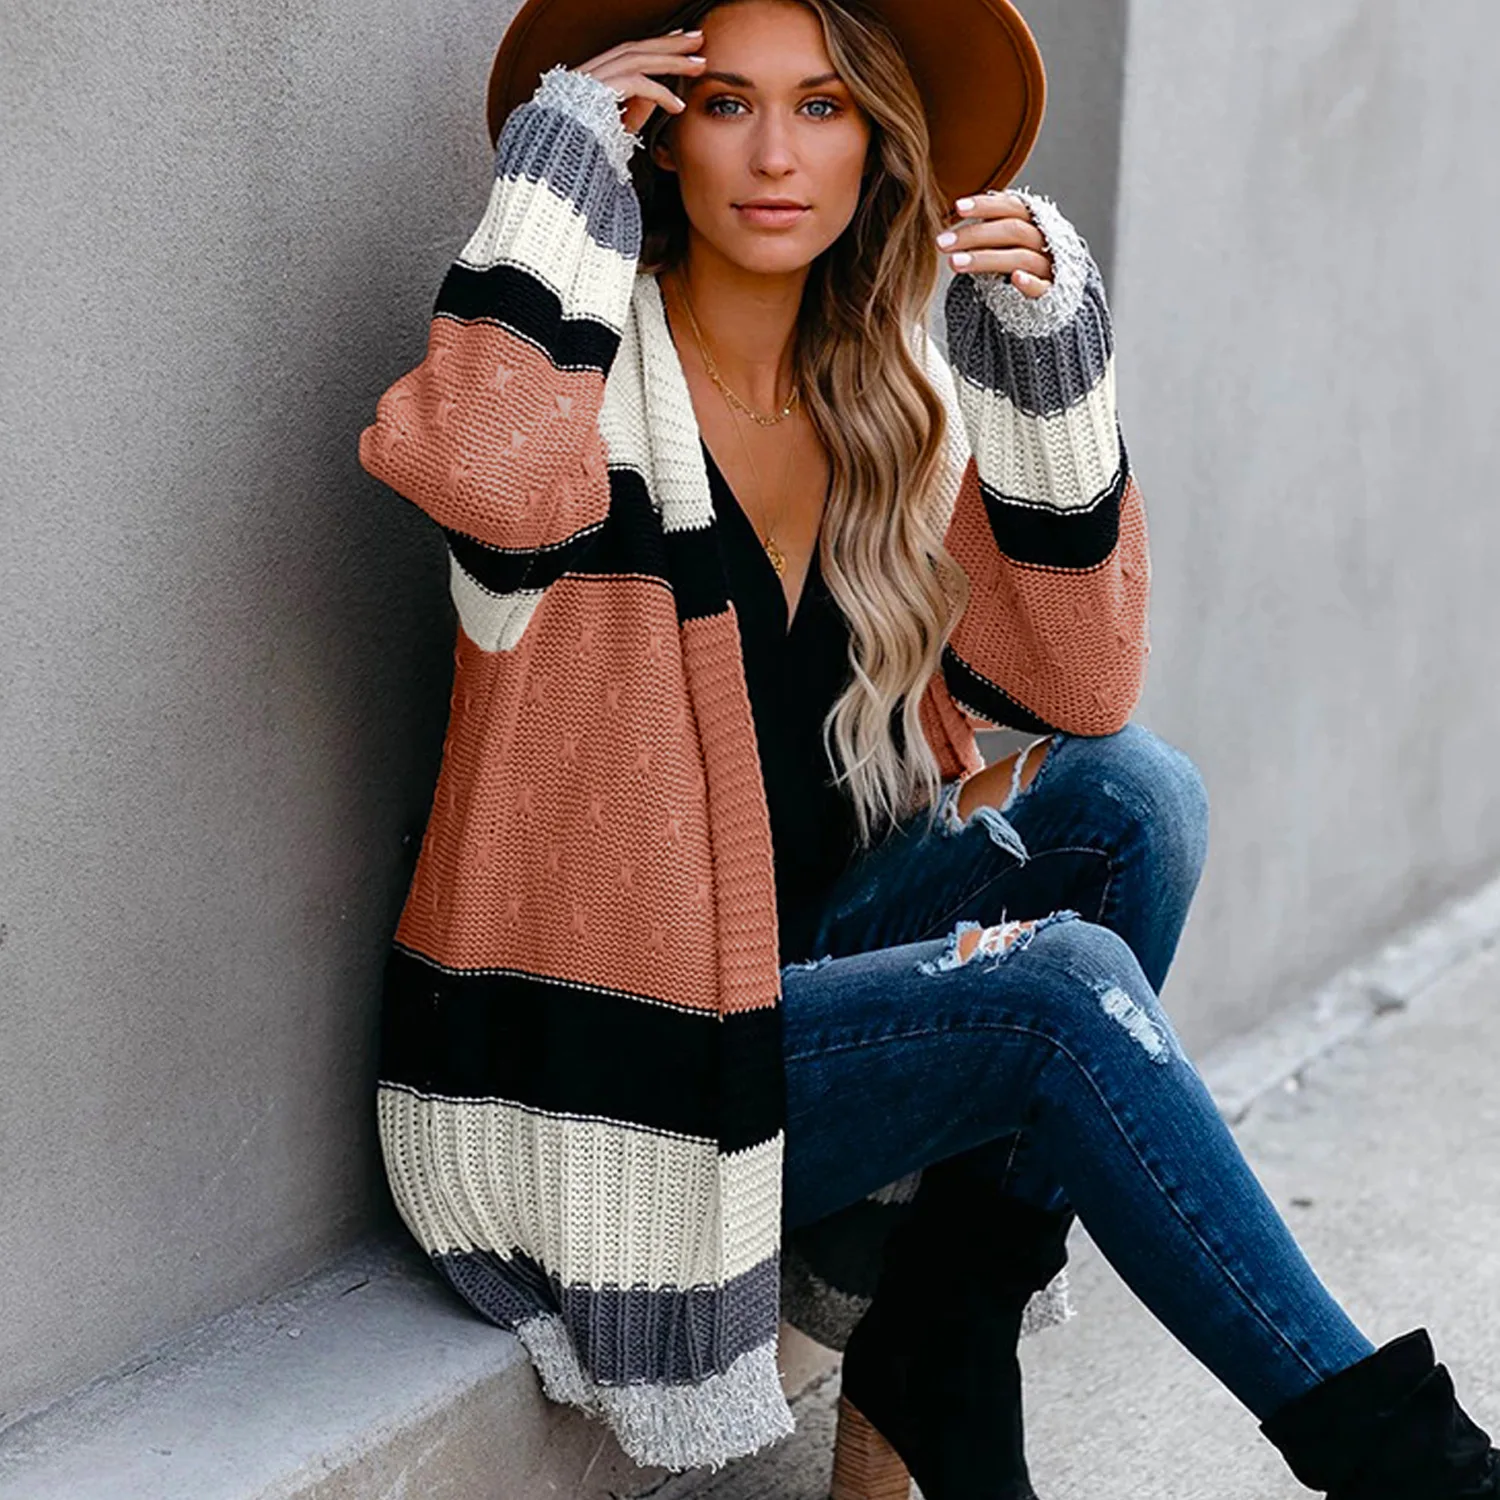 

Striped print knitted long cardigans sweater women long sleeve kahki vintage cardigan jumper casual office ladies outfit 2020